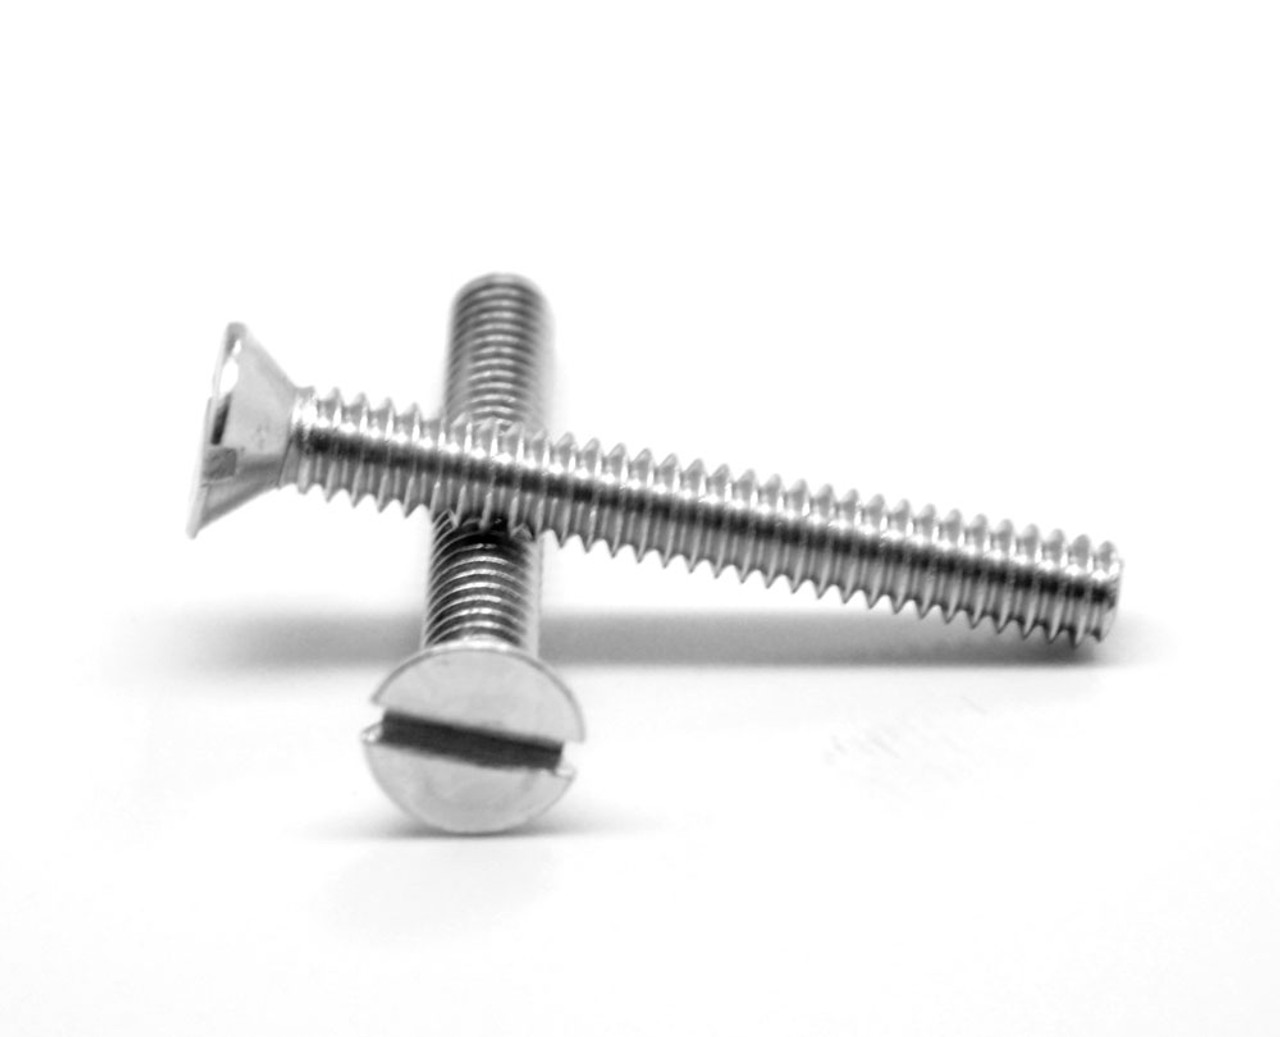 #10-24 x 6" (FT) Coarse Thread Machine Screw Slotted Flat Head Stainless Steel 18-8